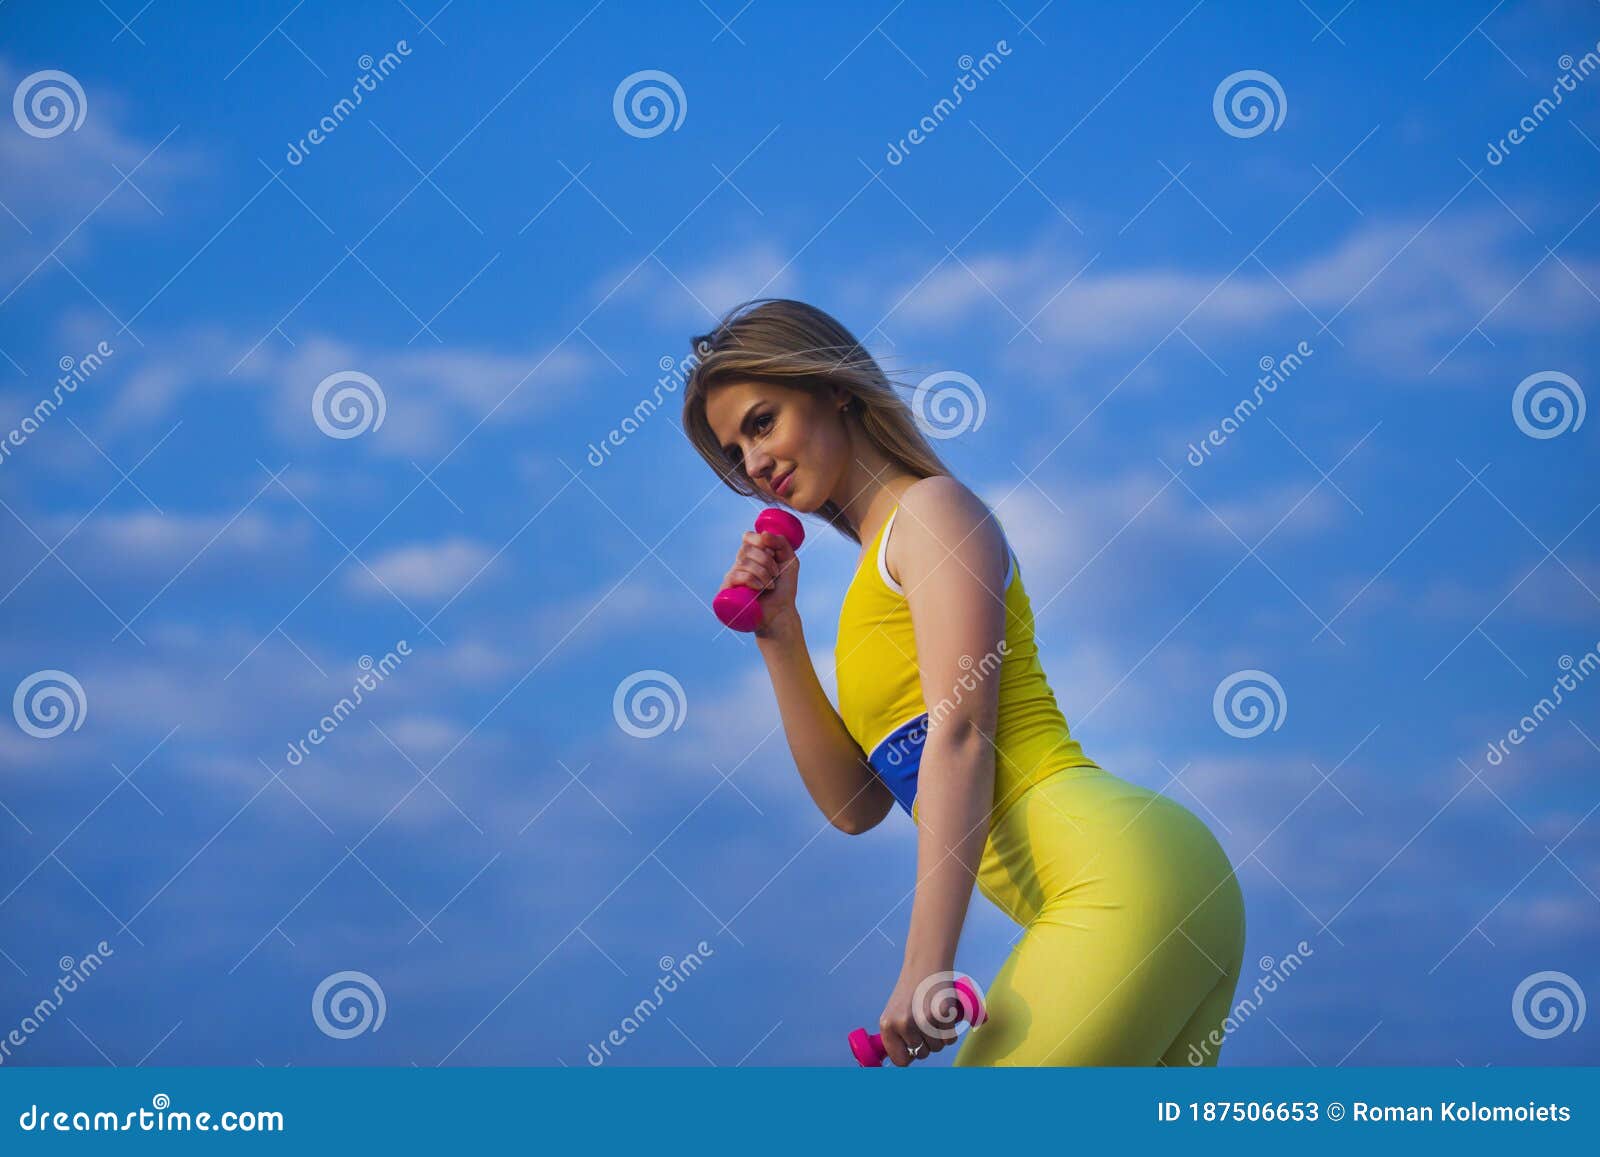 Beauty Perfect Body Presents Slim Fitness Girl Stock Image Image Of